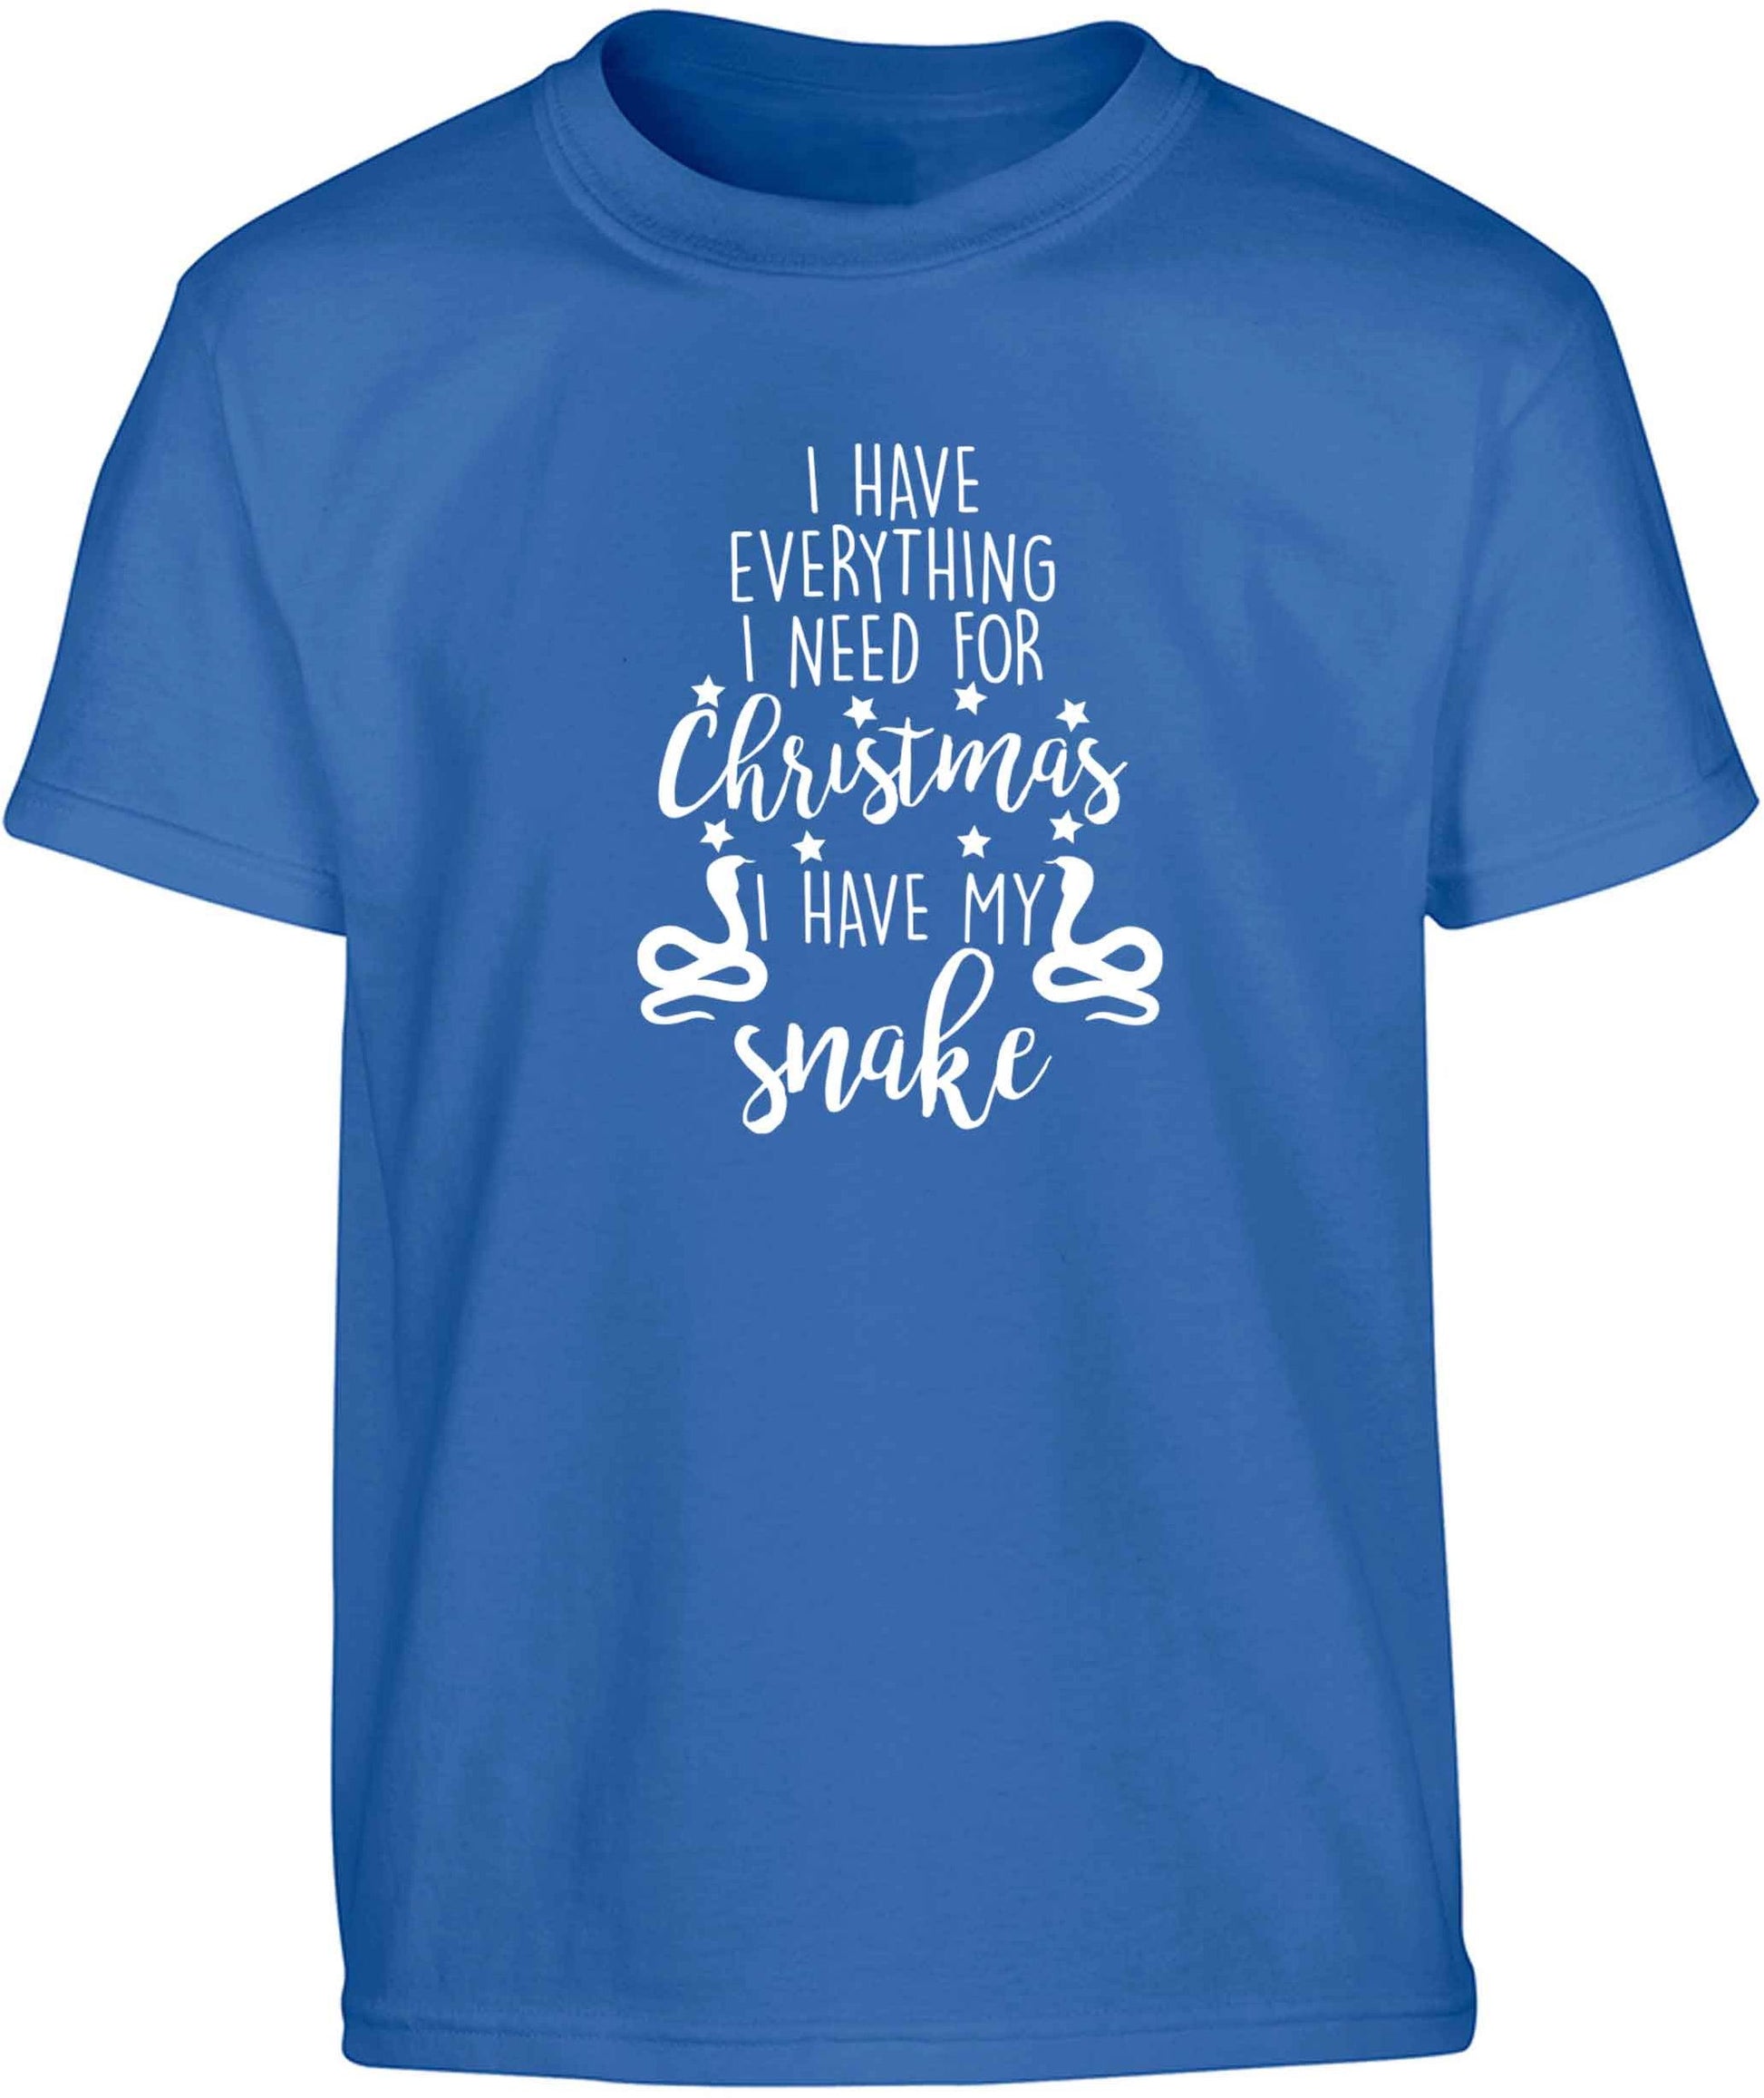 I have everything I need for Christmas I have my snake Children's blue Tshirt 12-13 Years